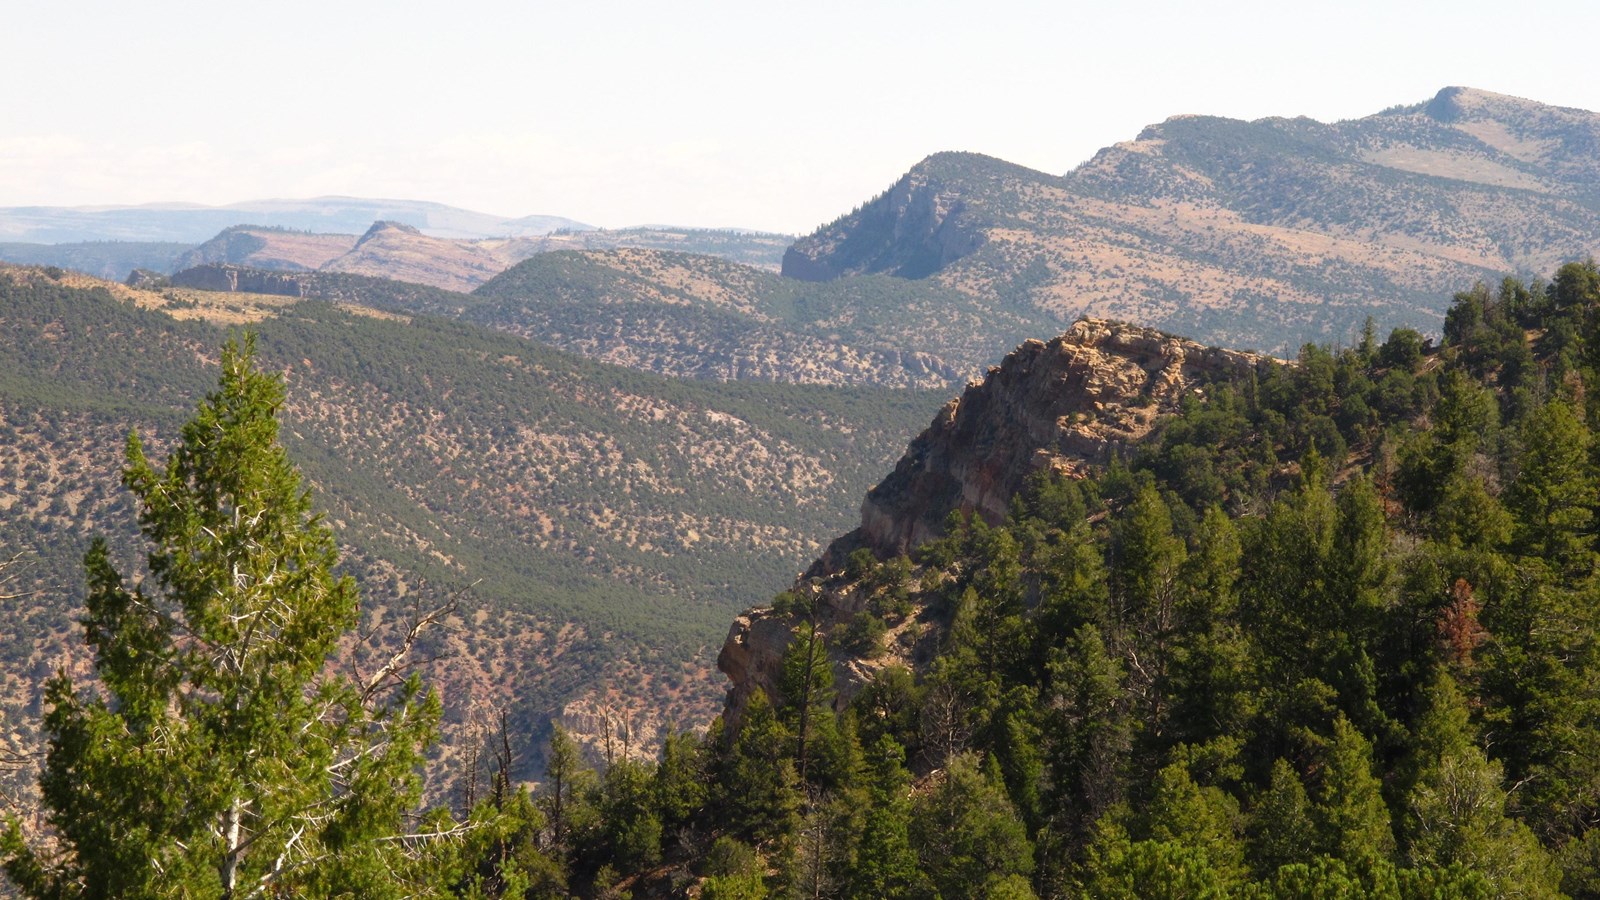 A view over pine trees looking at steep desert canyon walls.